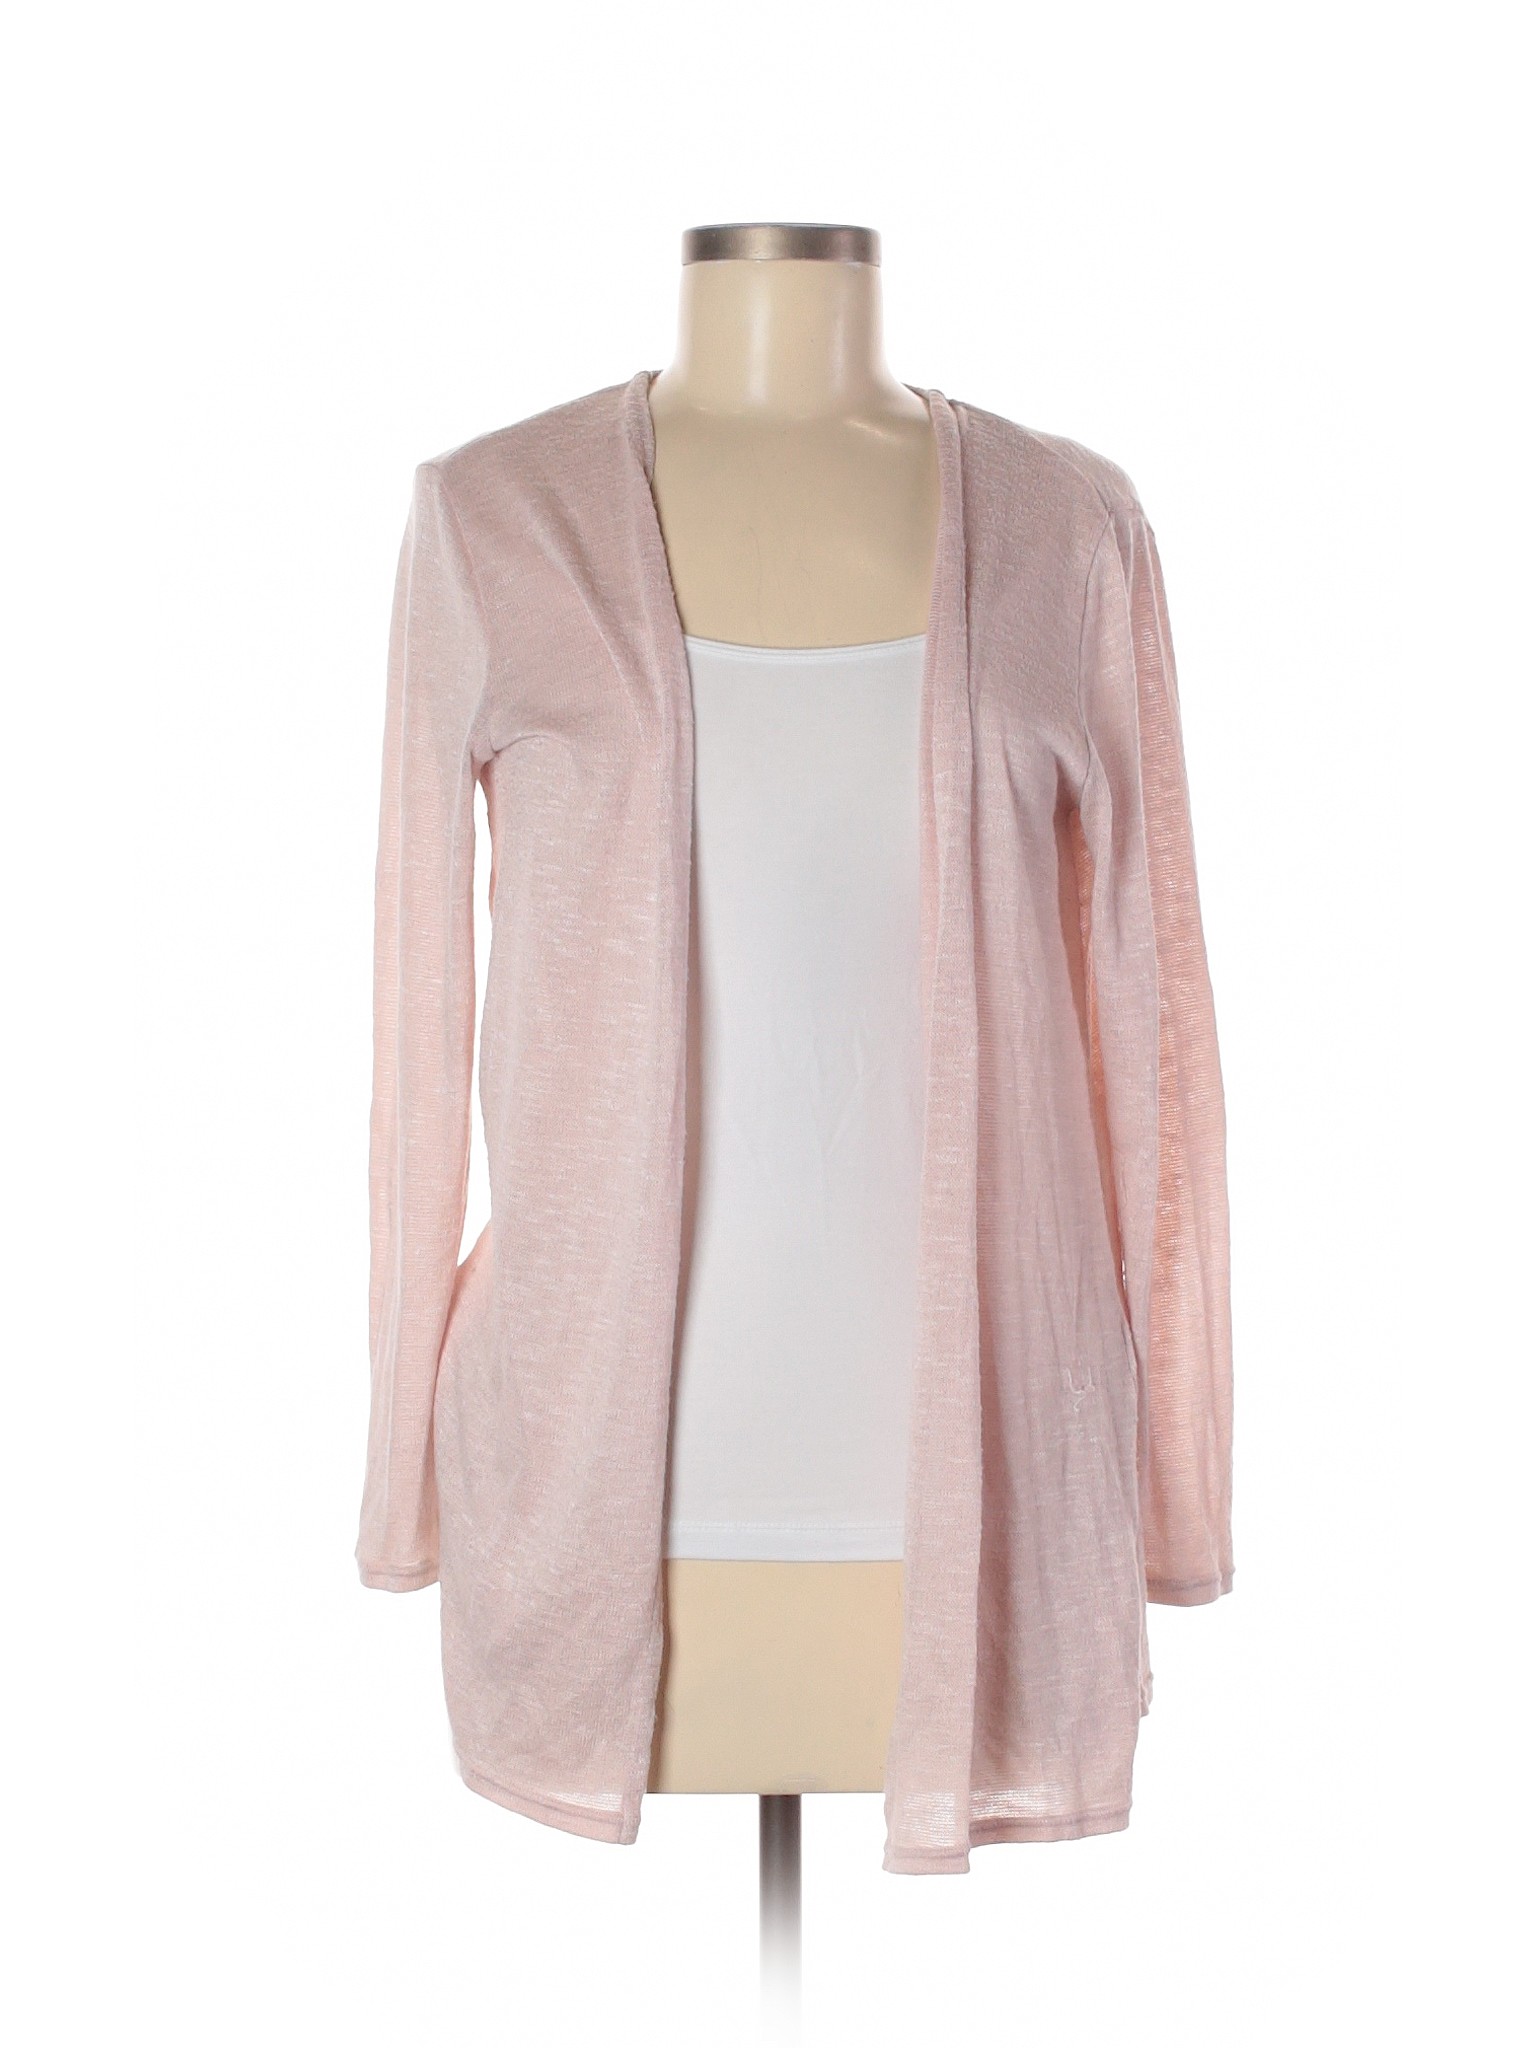 Divided by H&M Women Pink Cardigan M | eBay